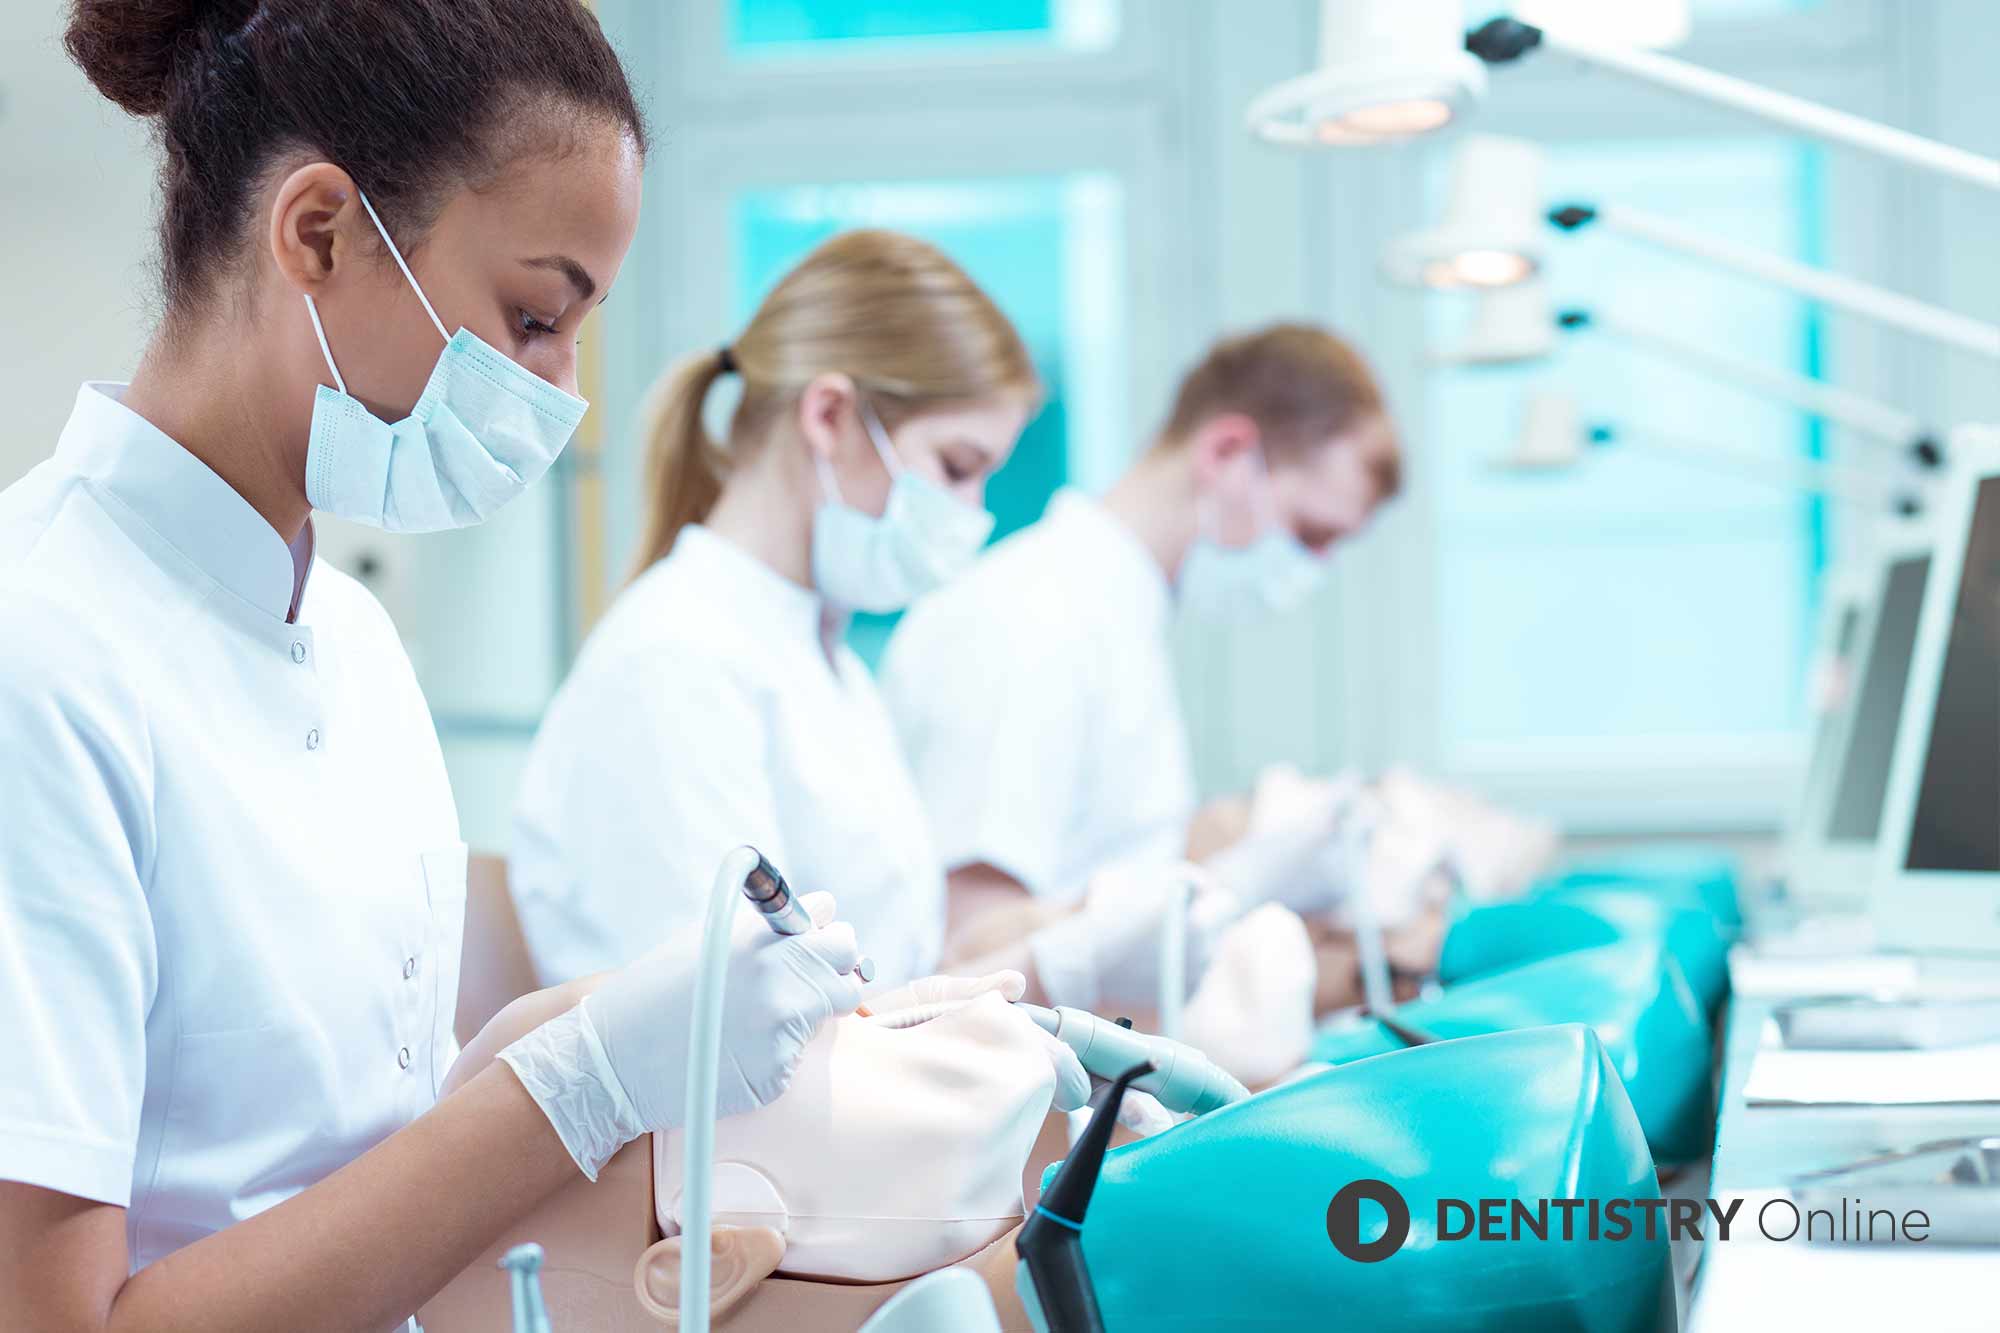 More than 20,000 extra applicants have signed up for dentistry and medicine courses this year, it has been revealed